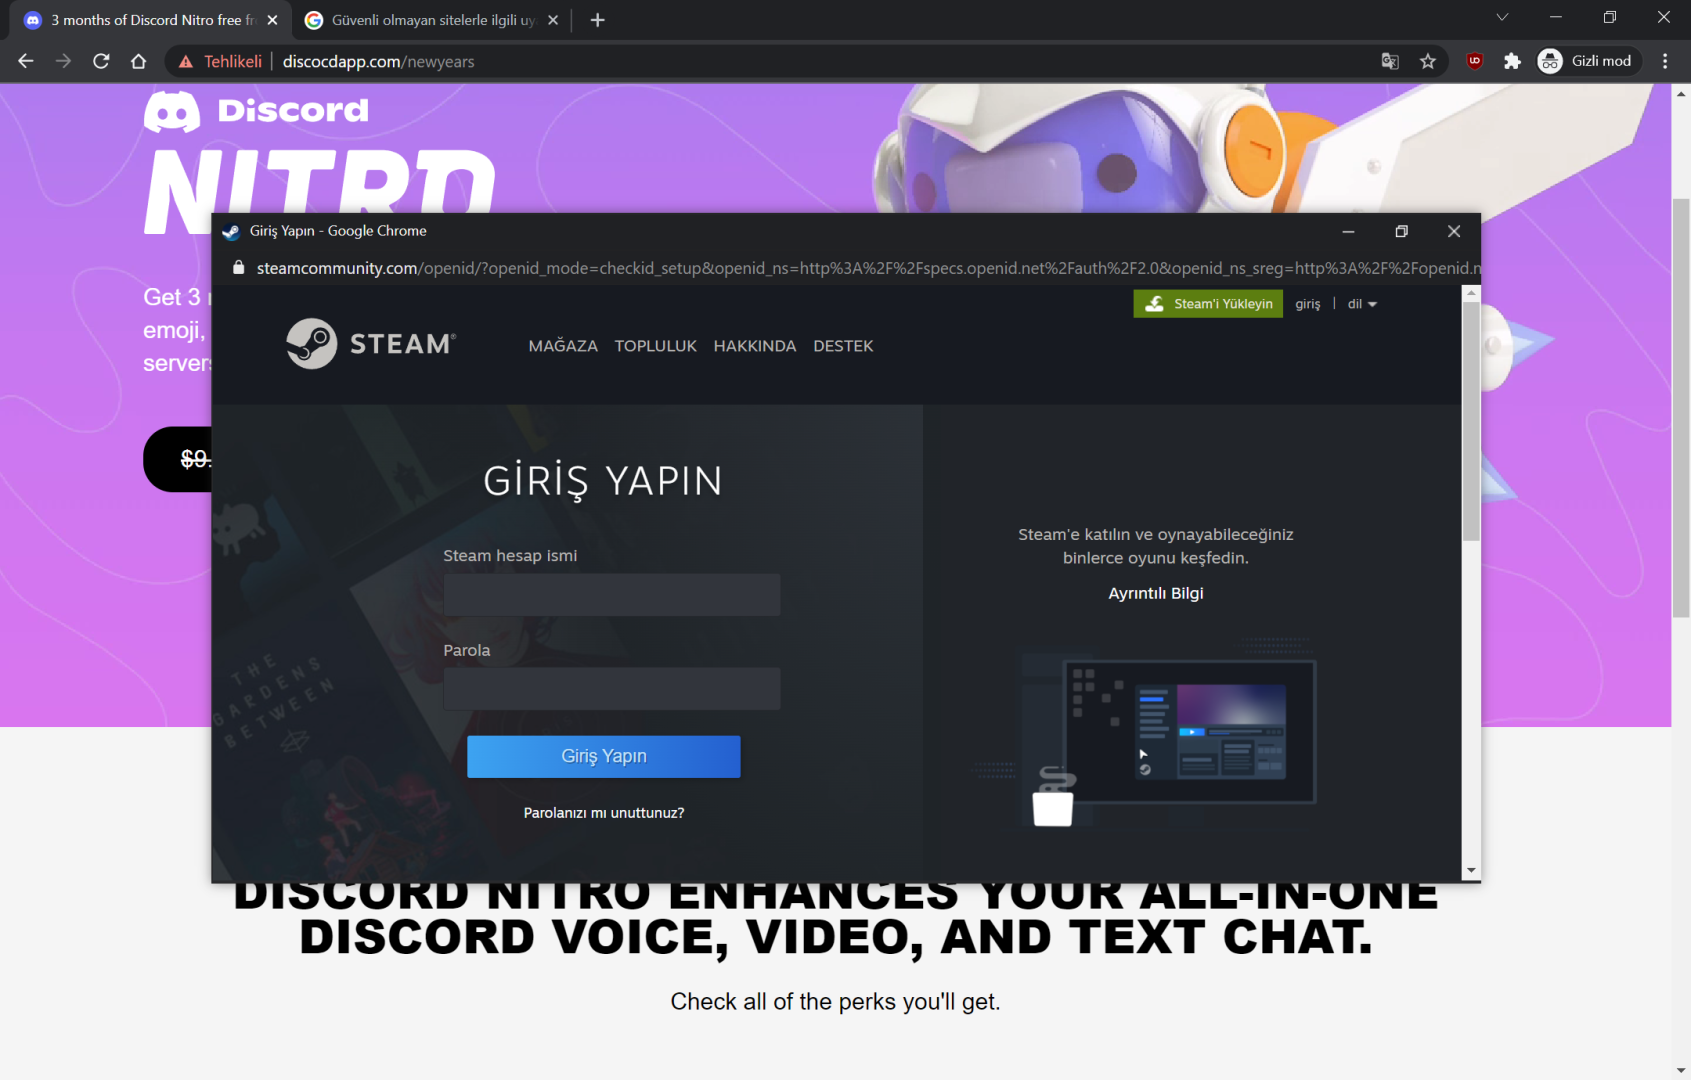 3 months of Discord Nitro free from STEAM - Google Chrome 30.01.2022 00_47_02.png